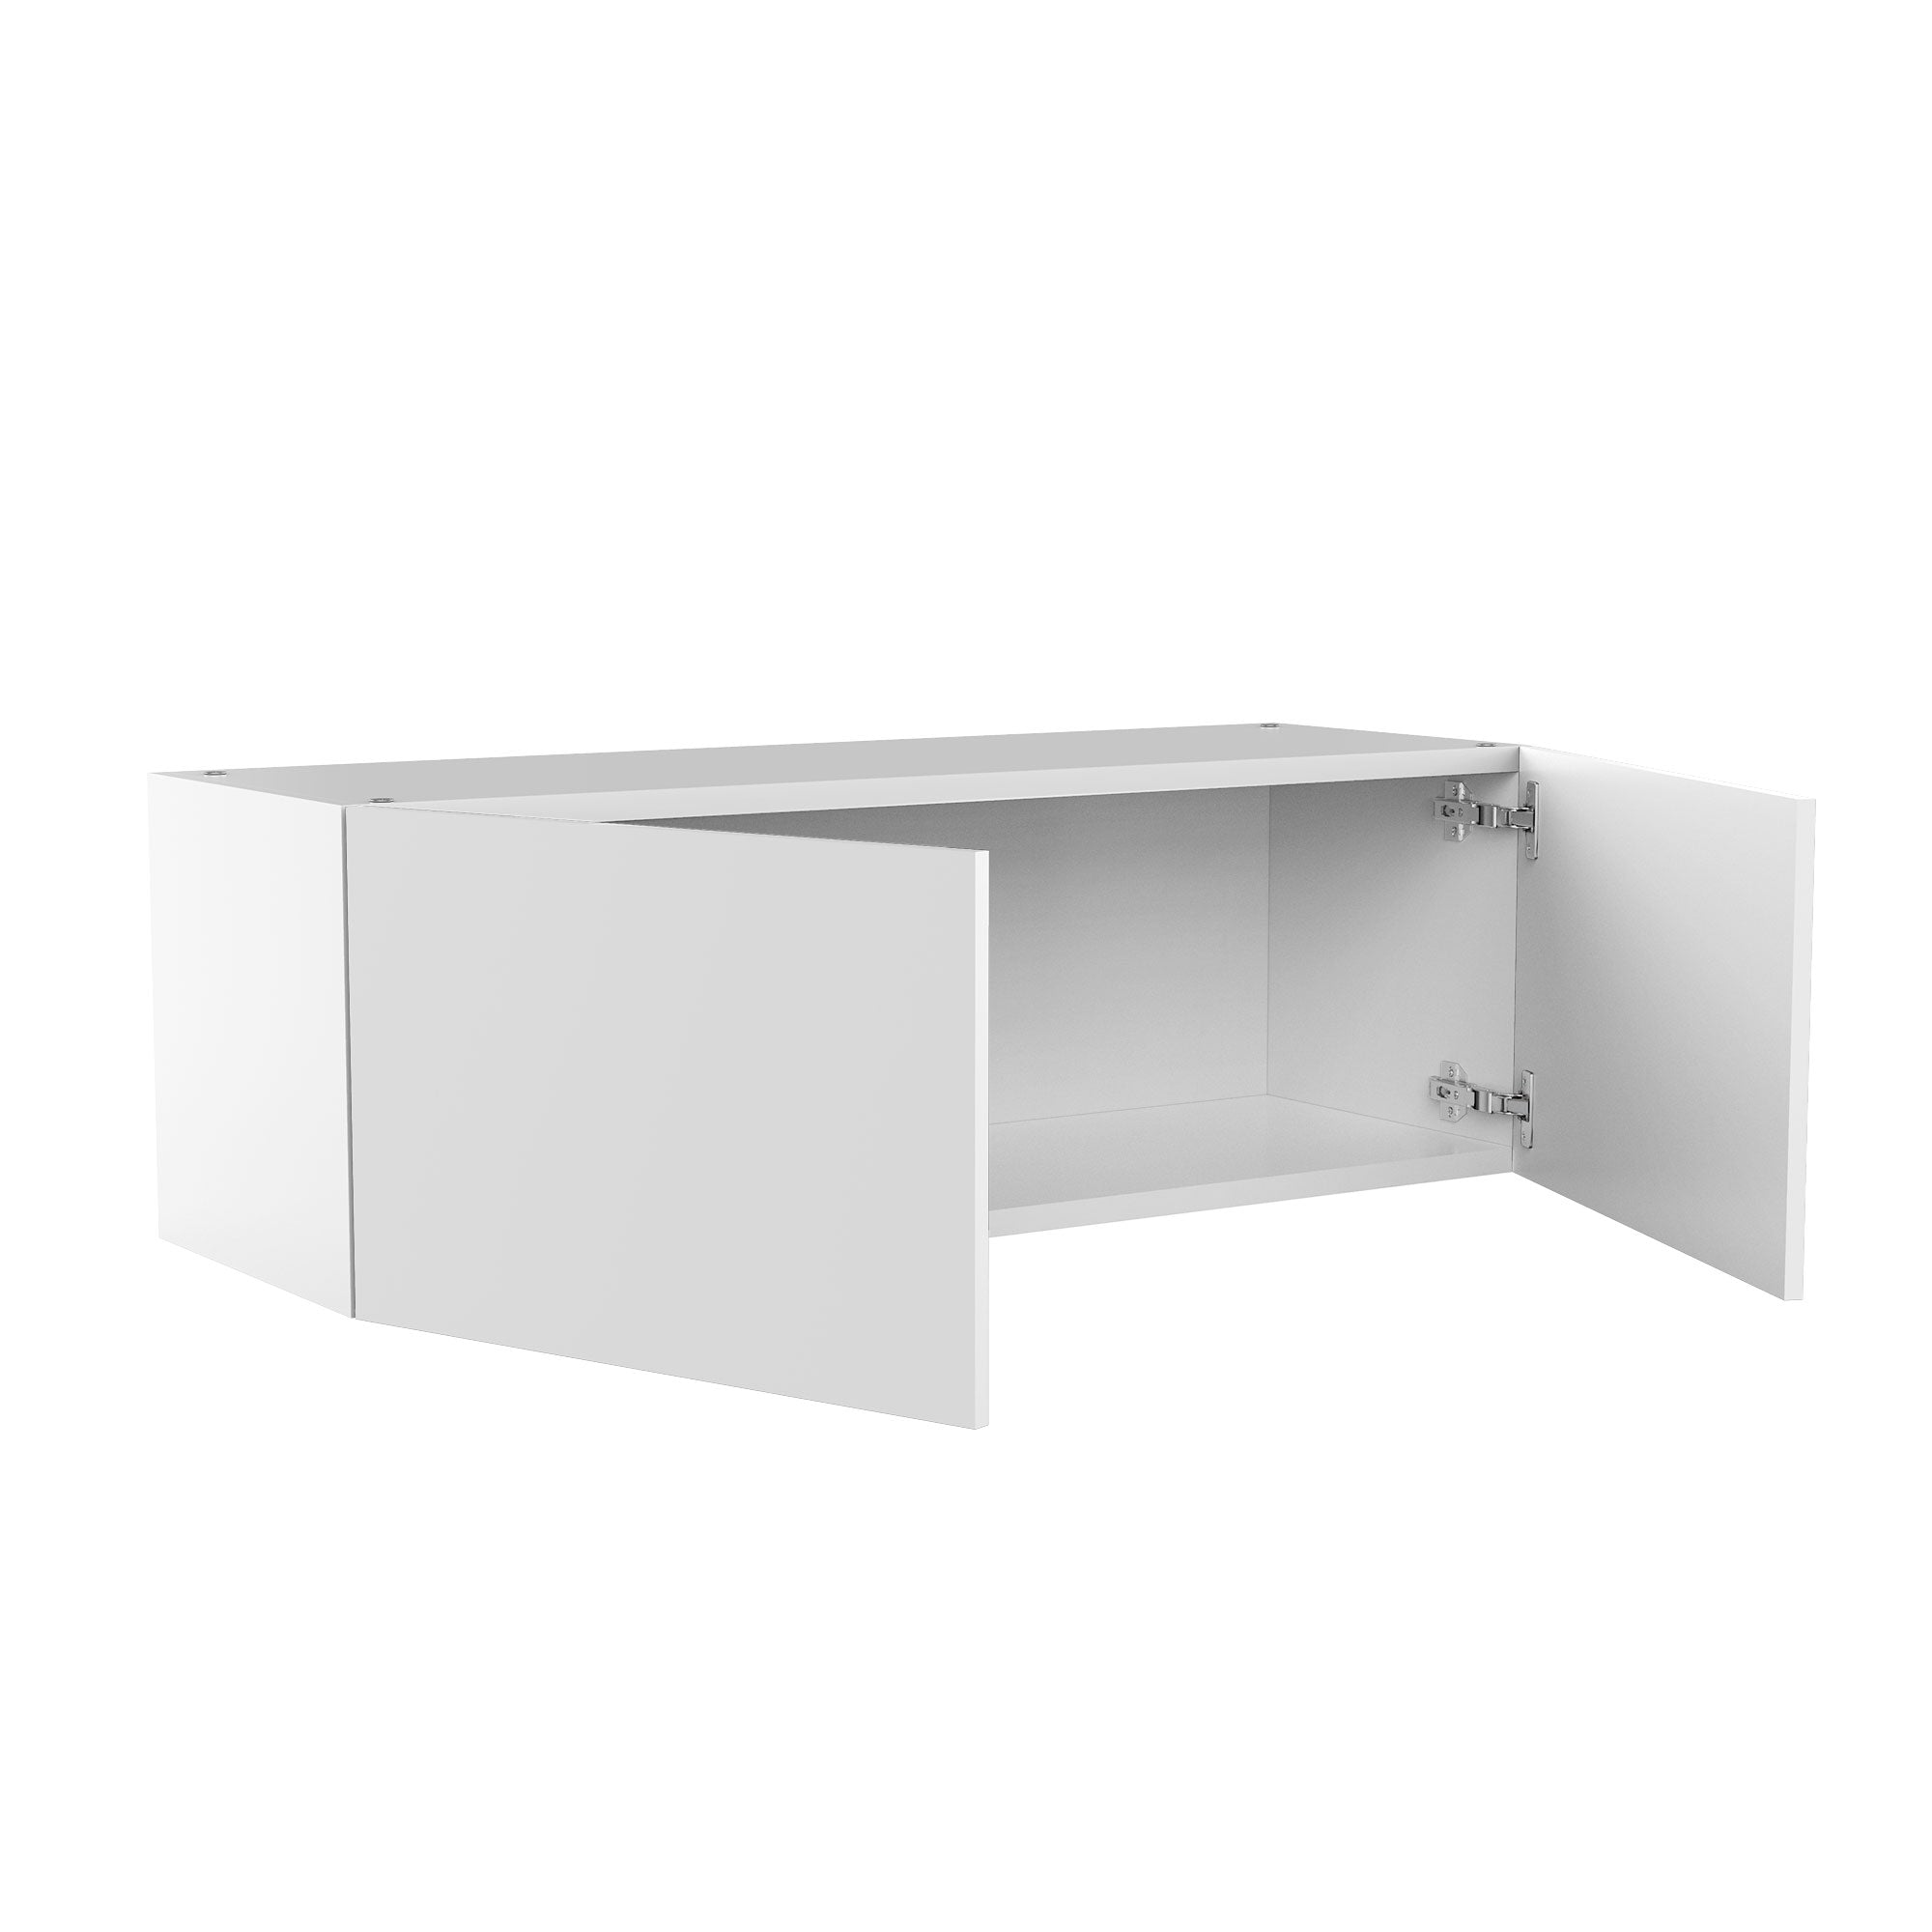 RTA - Glossy White - Double Door Wall Cabinets | 36"W x 12"H x 12"D